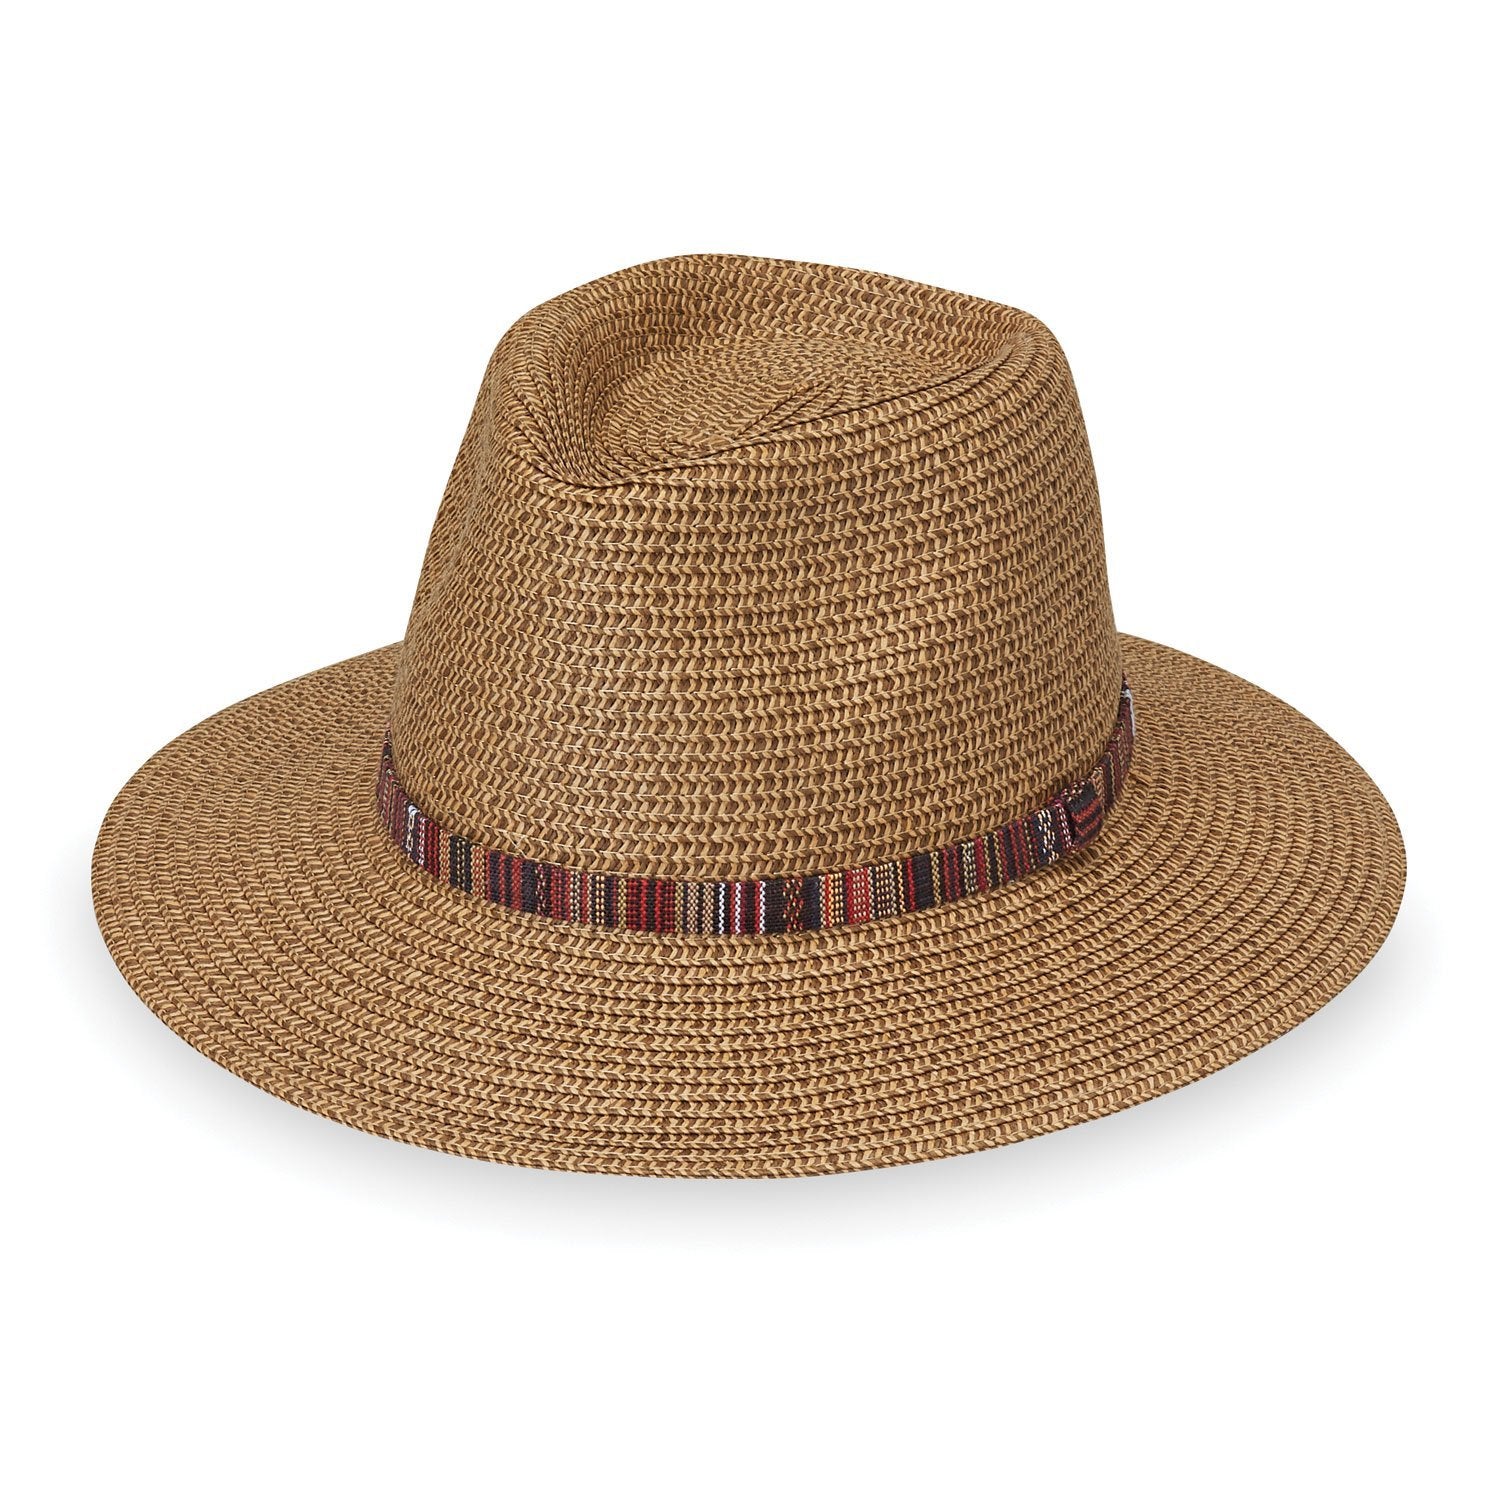 Featuring Packable Petite Sedona UPF Travel Sun Hat in Camel from Wallaroo